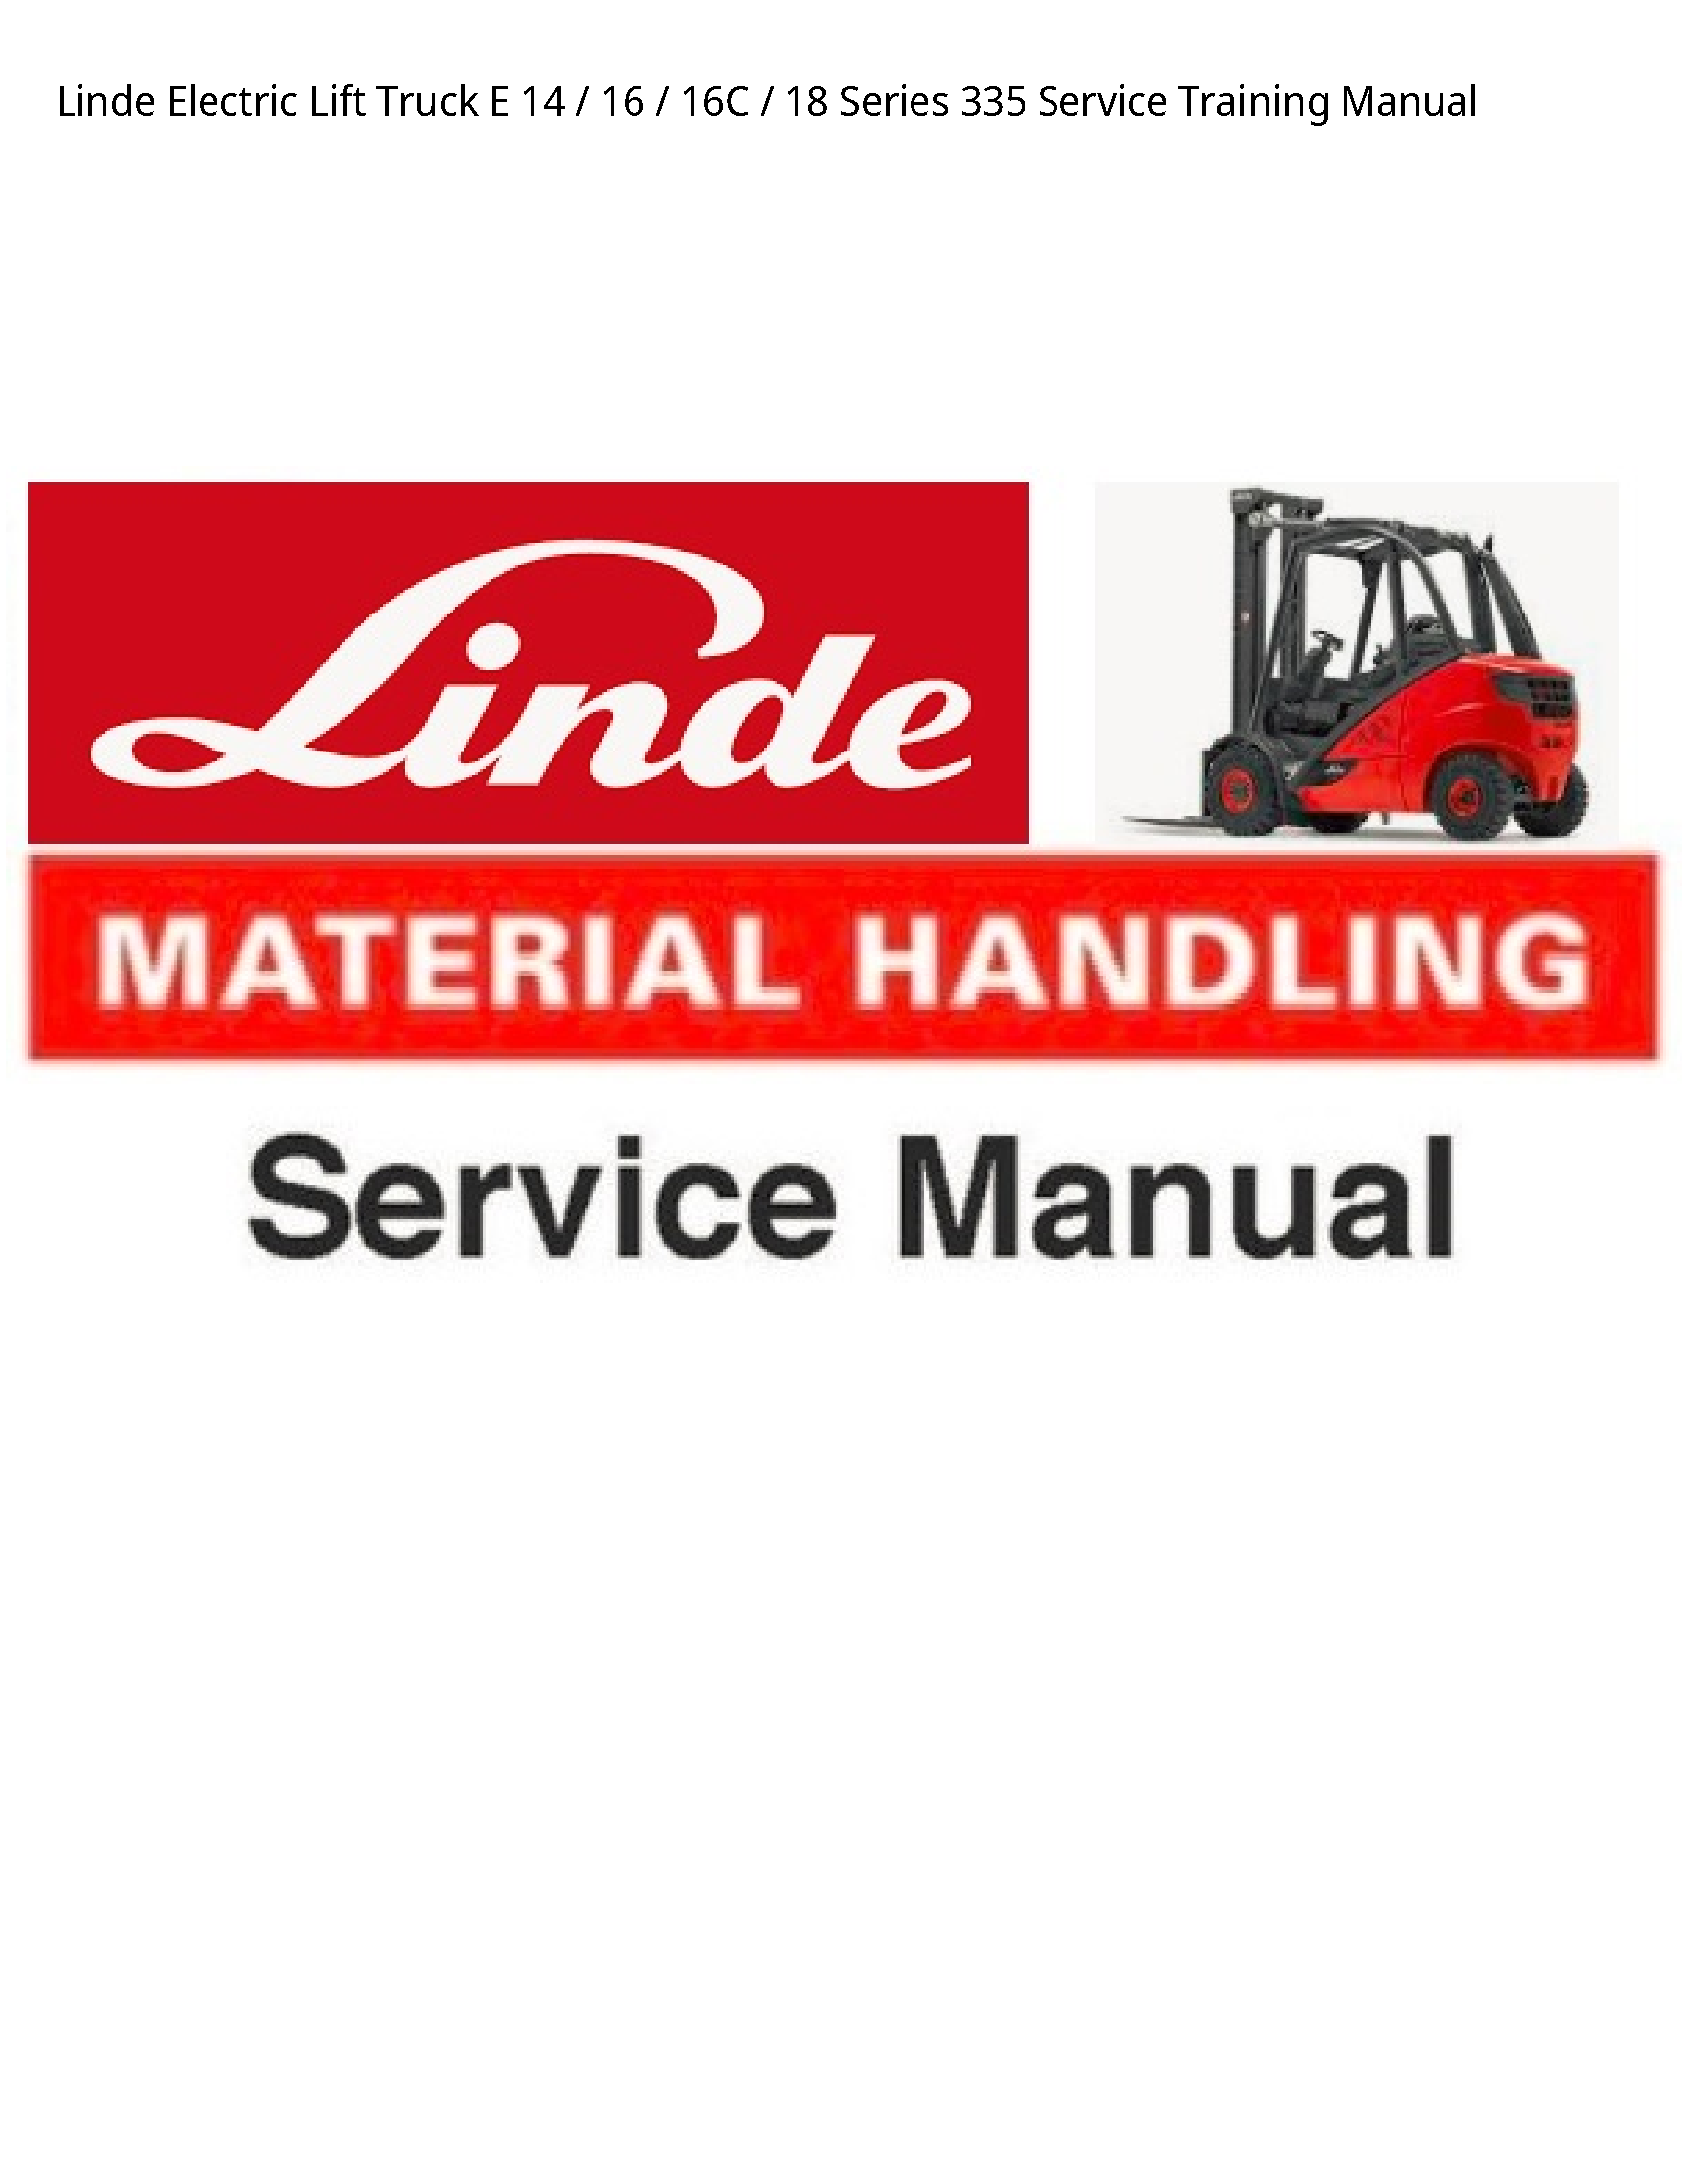 Linde 14 Electric Lift Truck Series Service Training manual